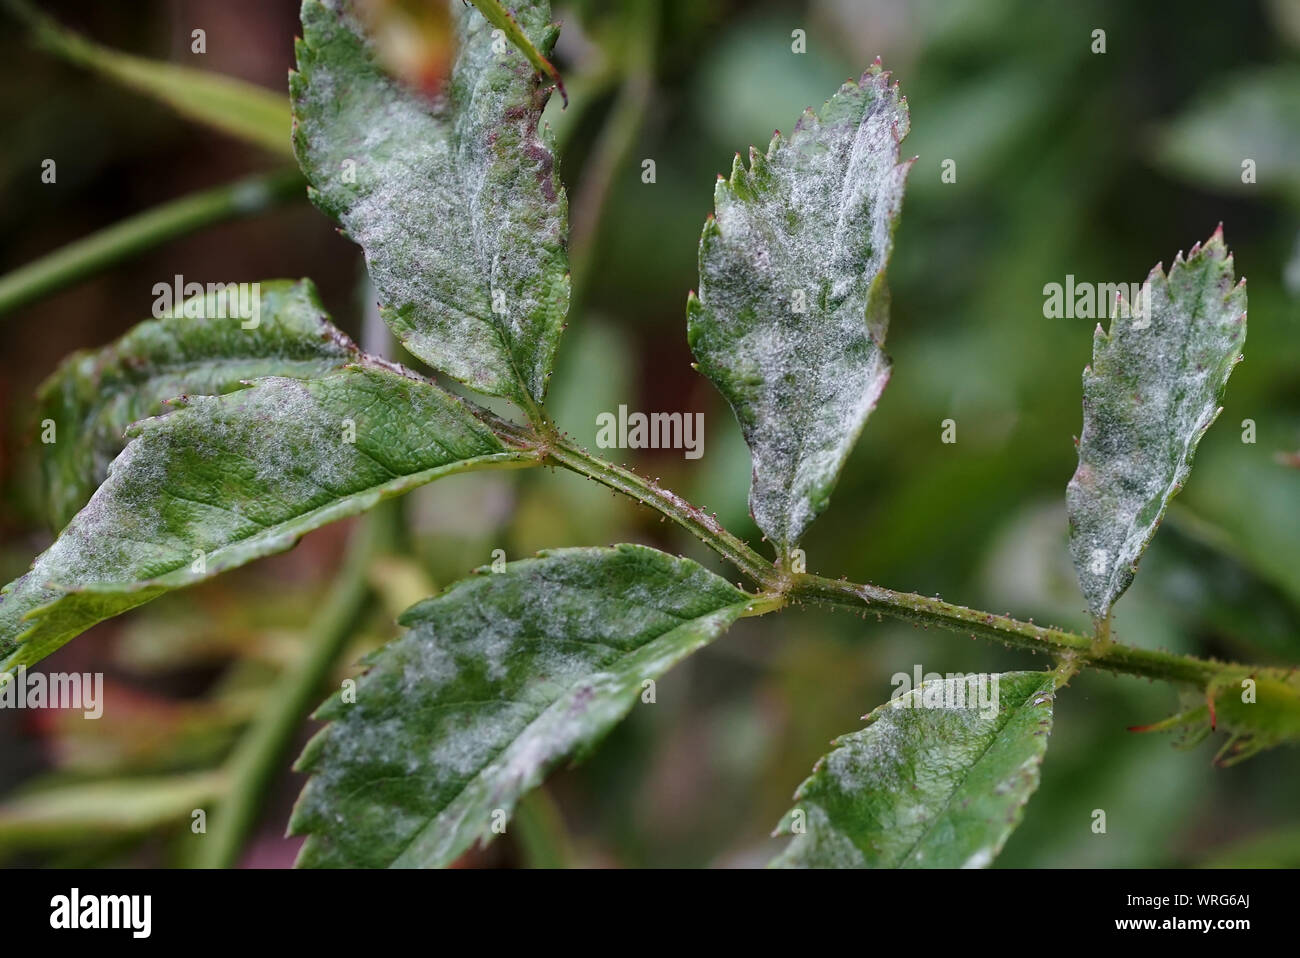 White coating (mold) on the leaves of a sick rose Stock Photo